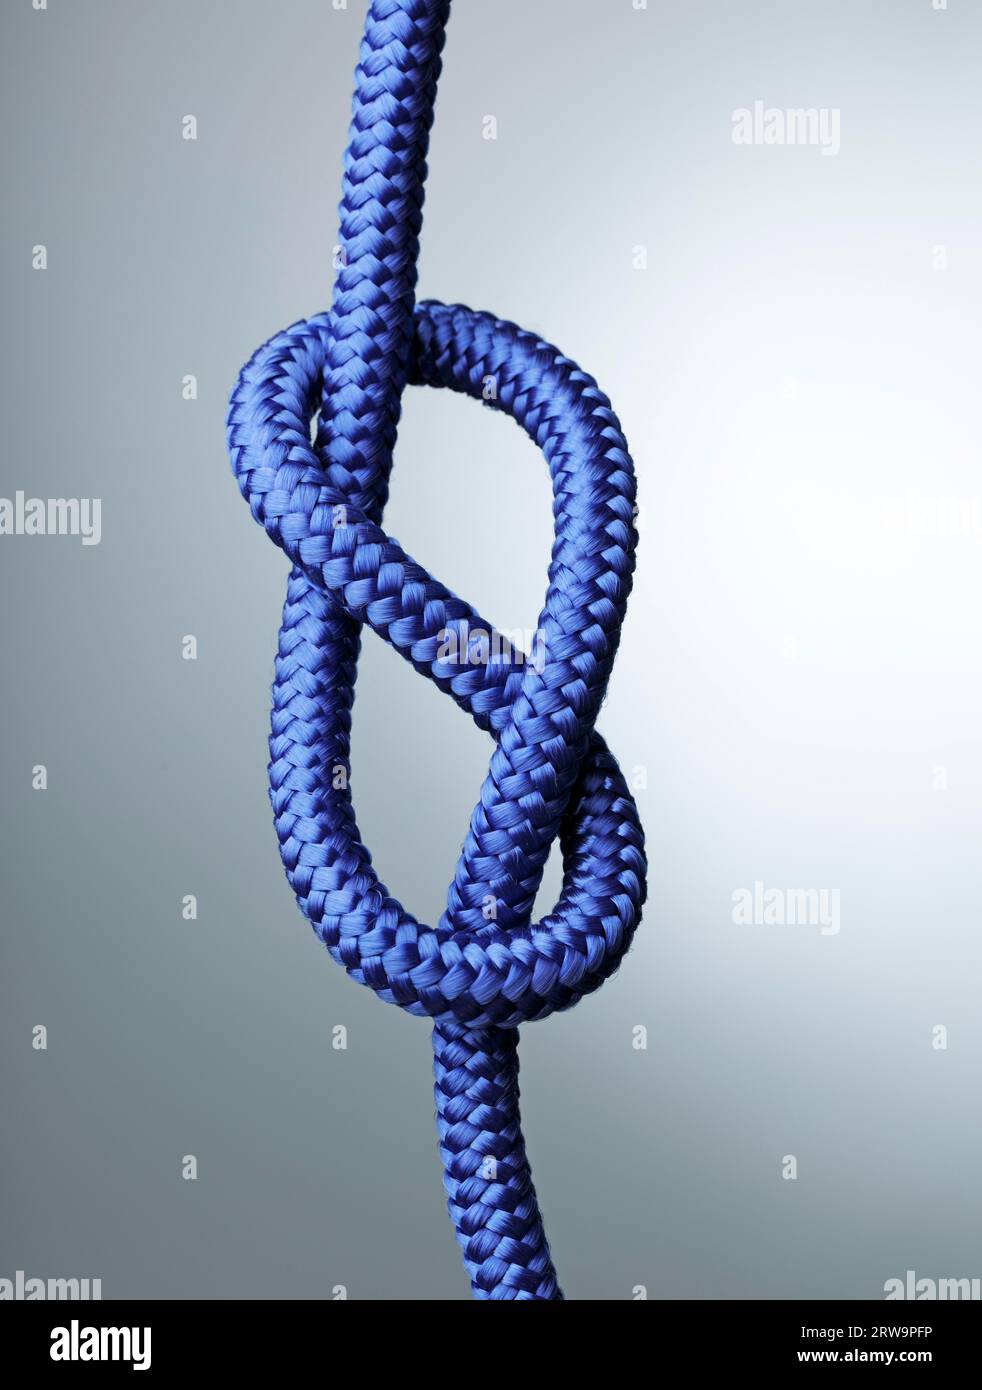 Blue rope with figure of eight stopper knot Stock Photo